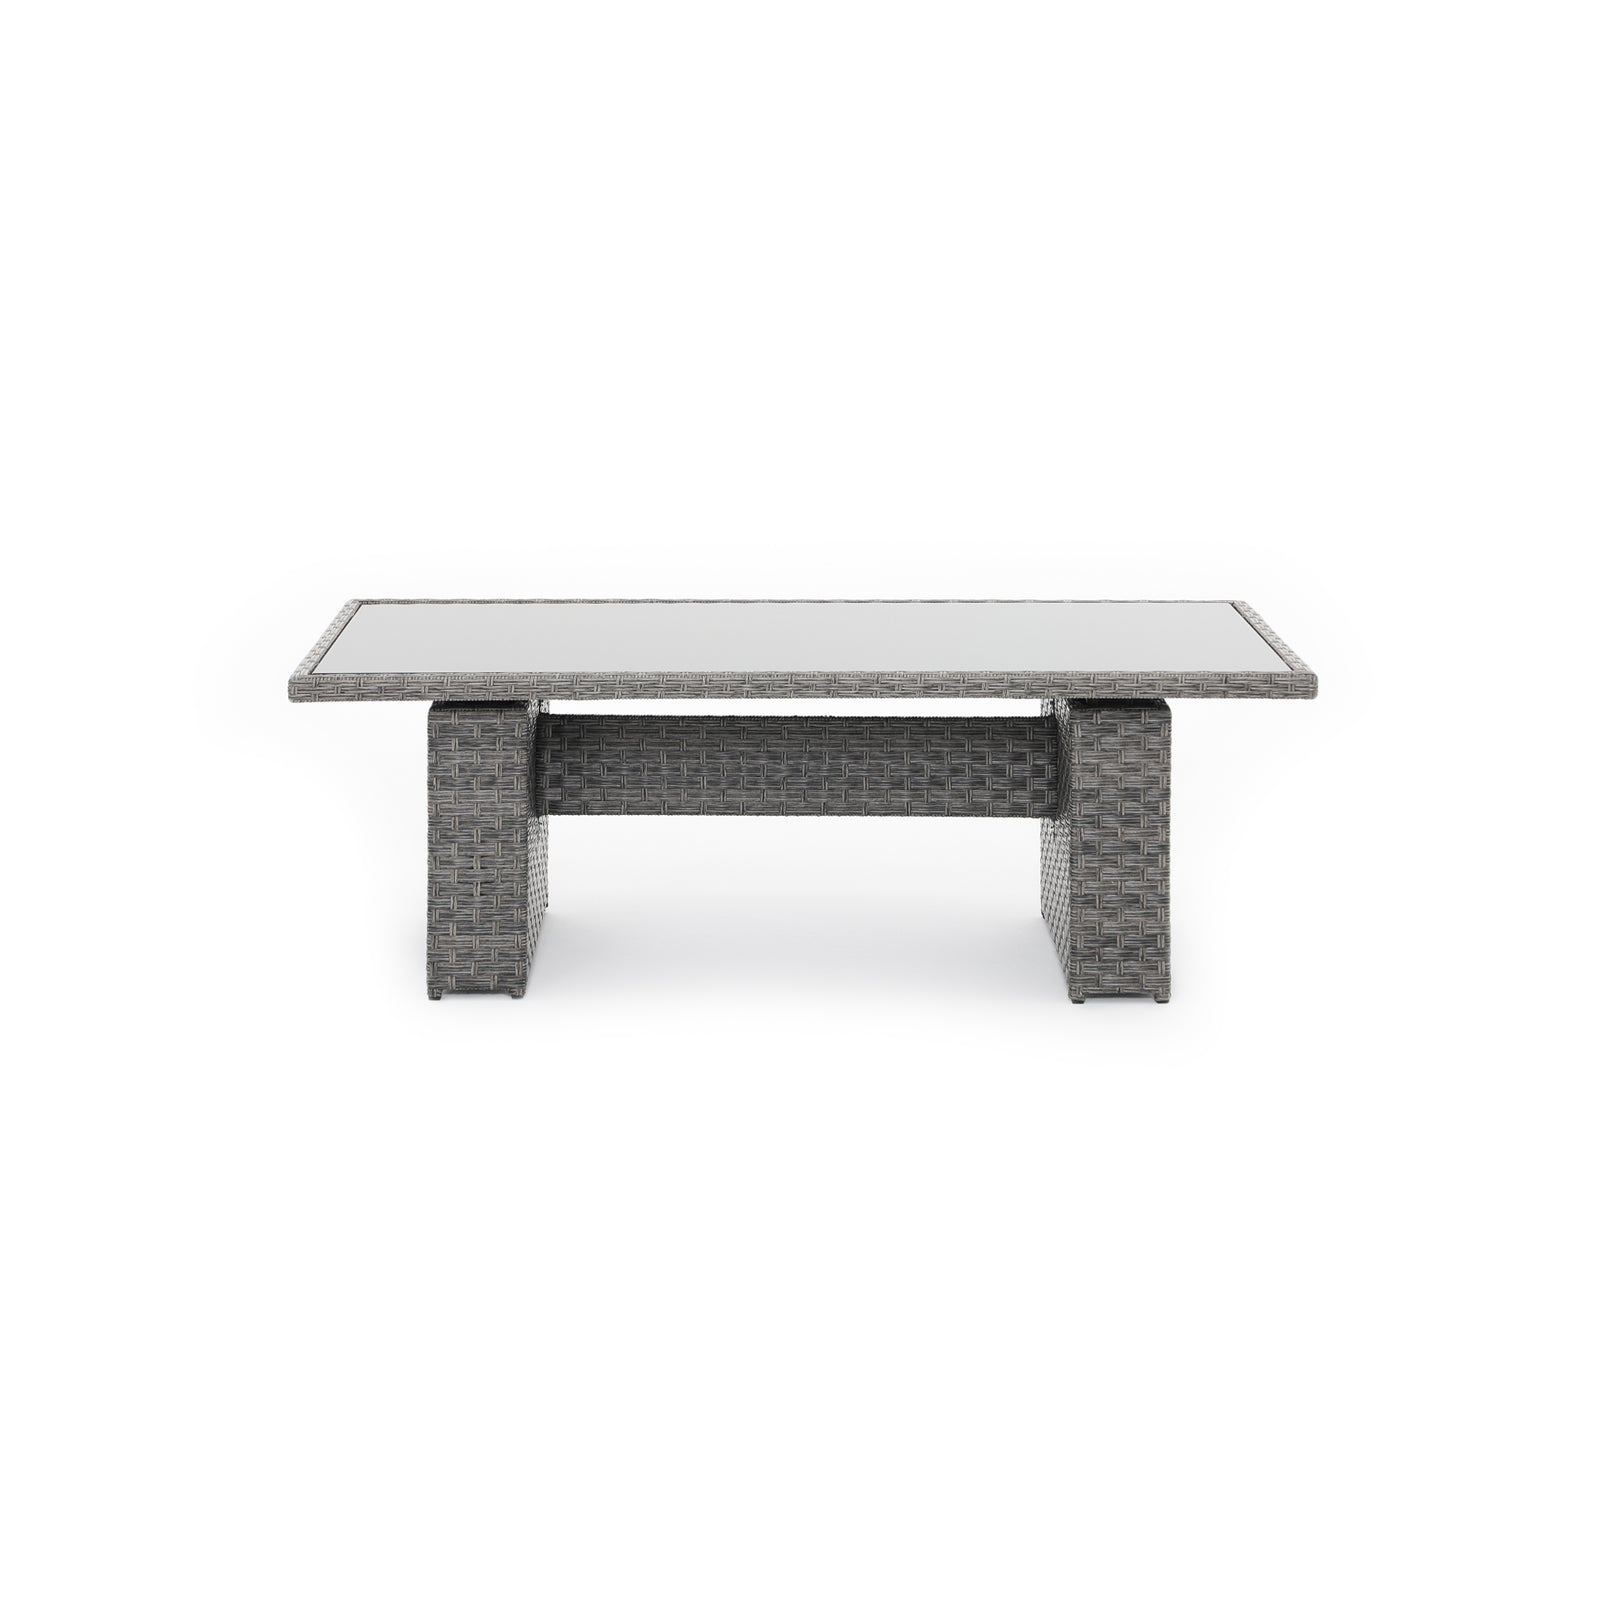 Aiya Grey wicker outdoor lift top dining table with metal frame, fold, front - Jardina Furniture